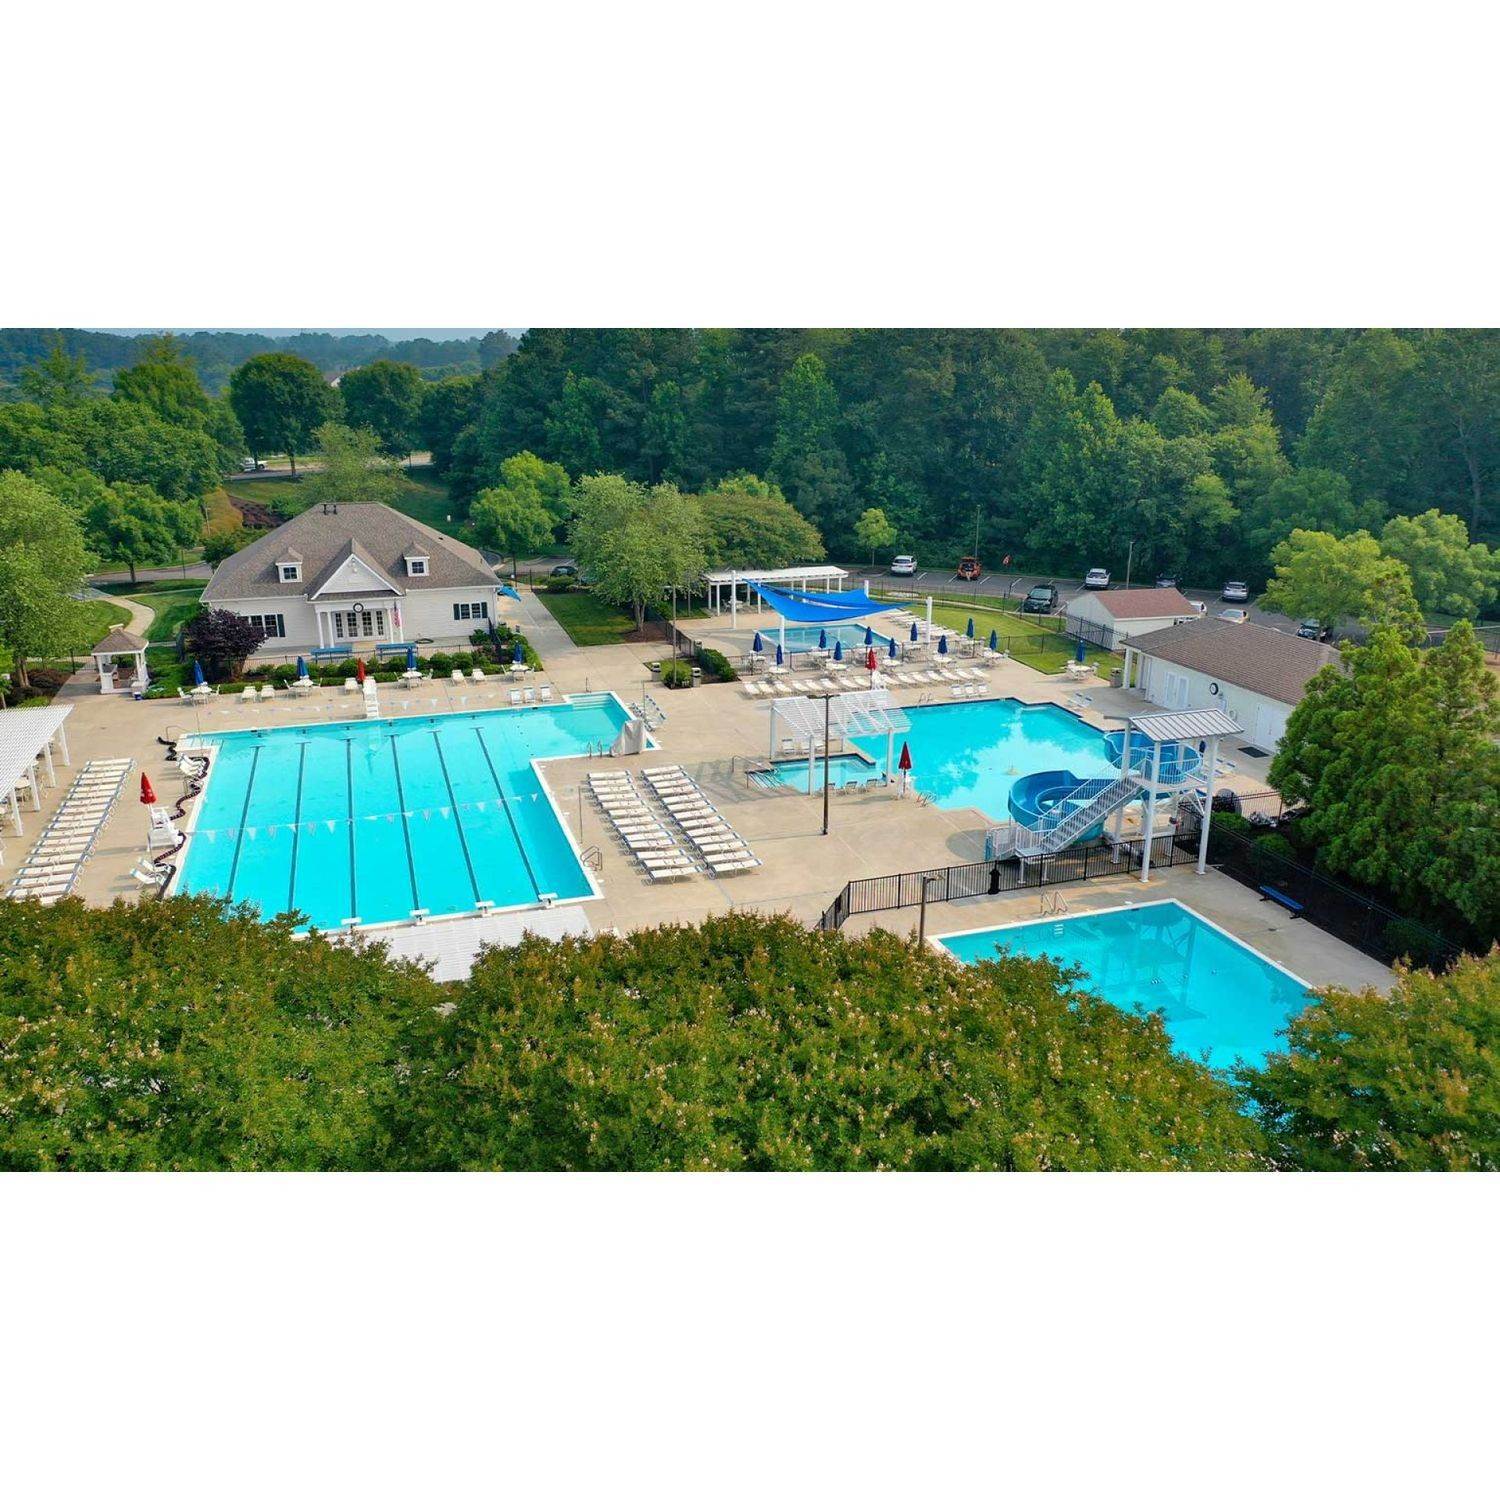 3. The Pointe at Twin Hickory byggnad vid 4605 Pouncey Tract Road, Glen Allen, VA 23059